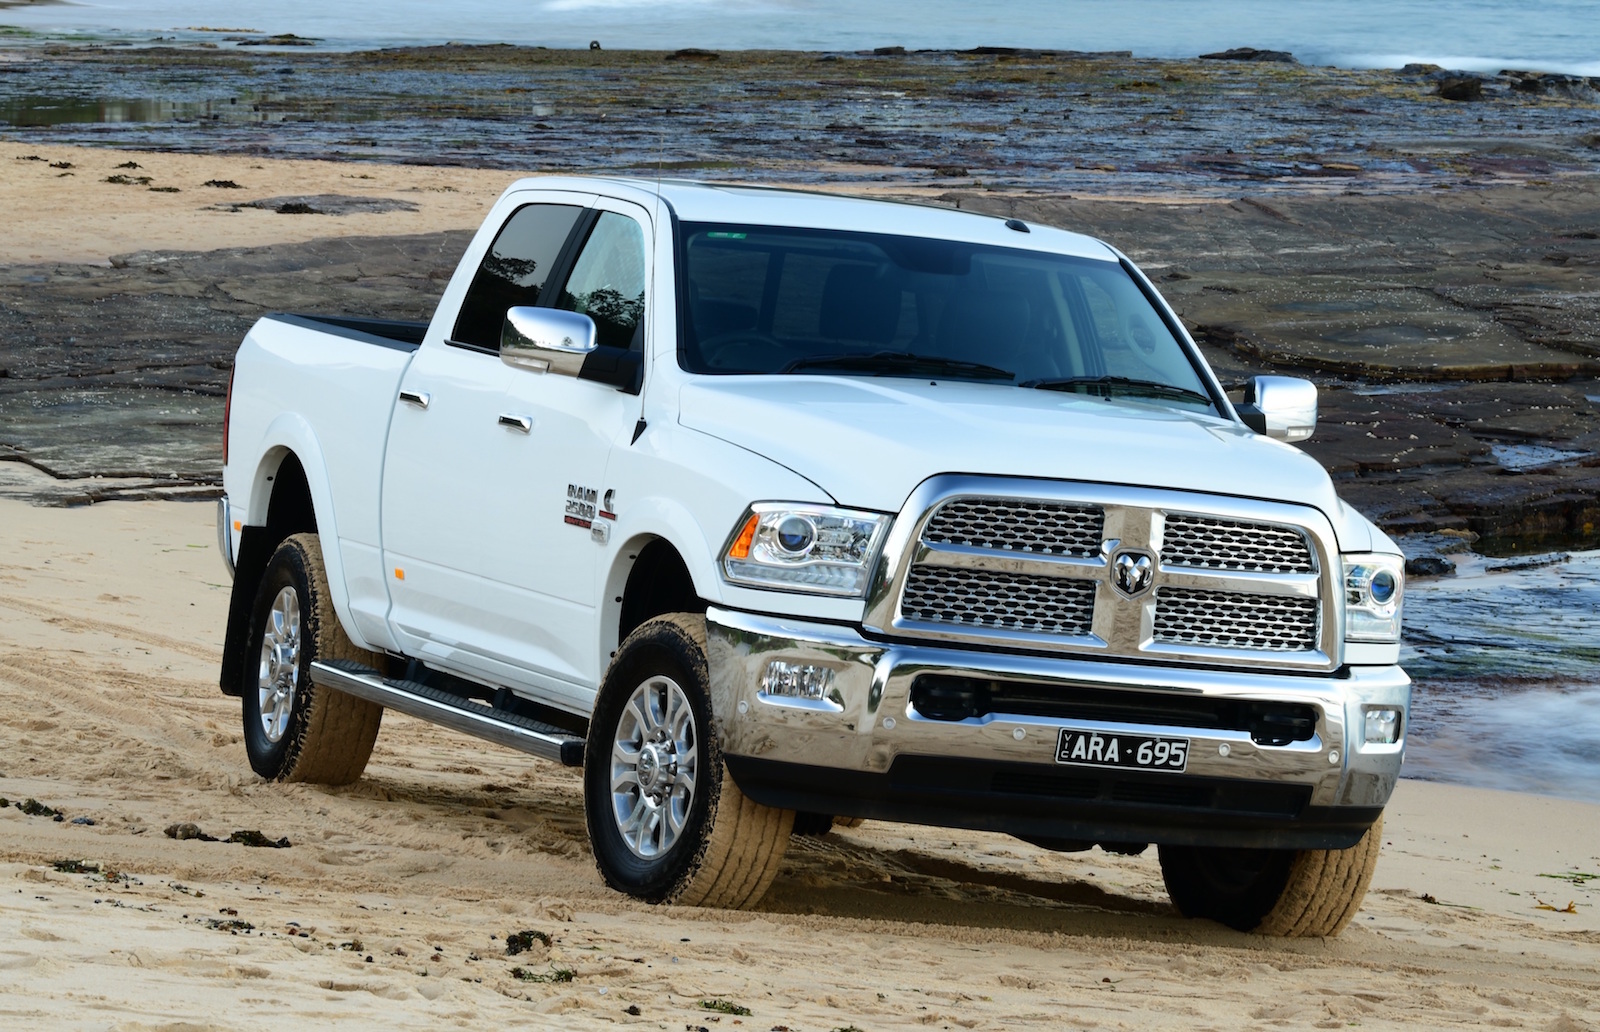 RAM 2500, 3500 recalled, steering could “turn in the wrong direction”